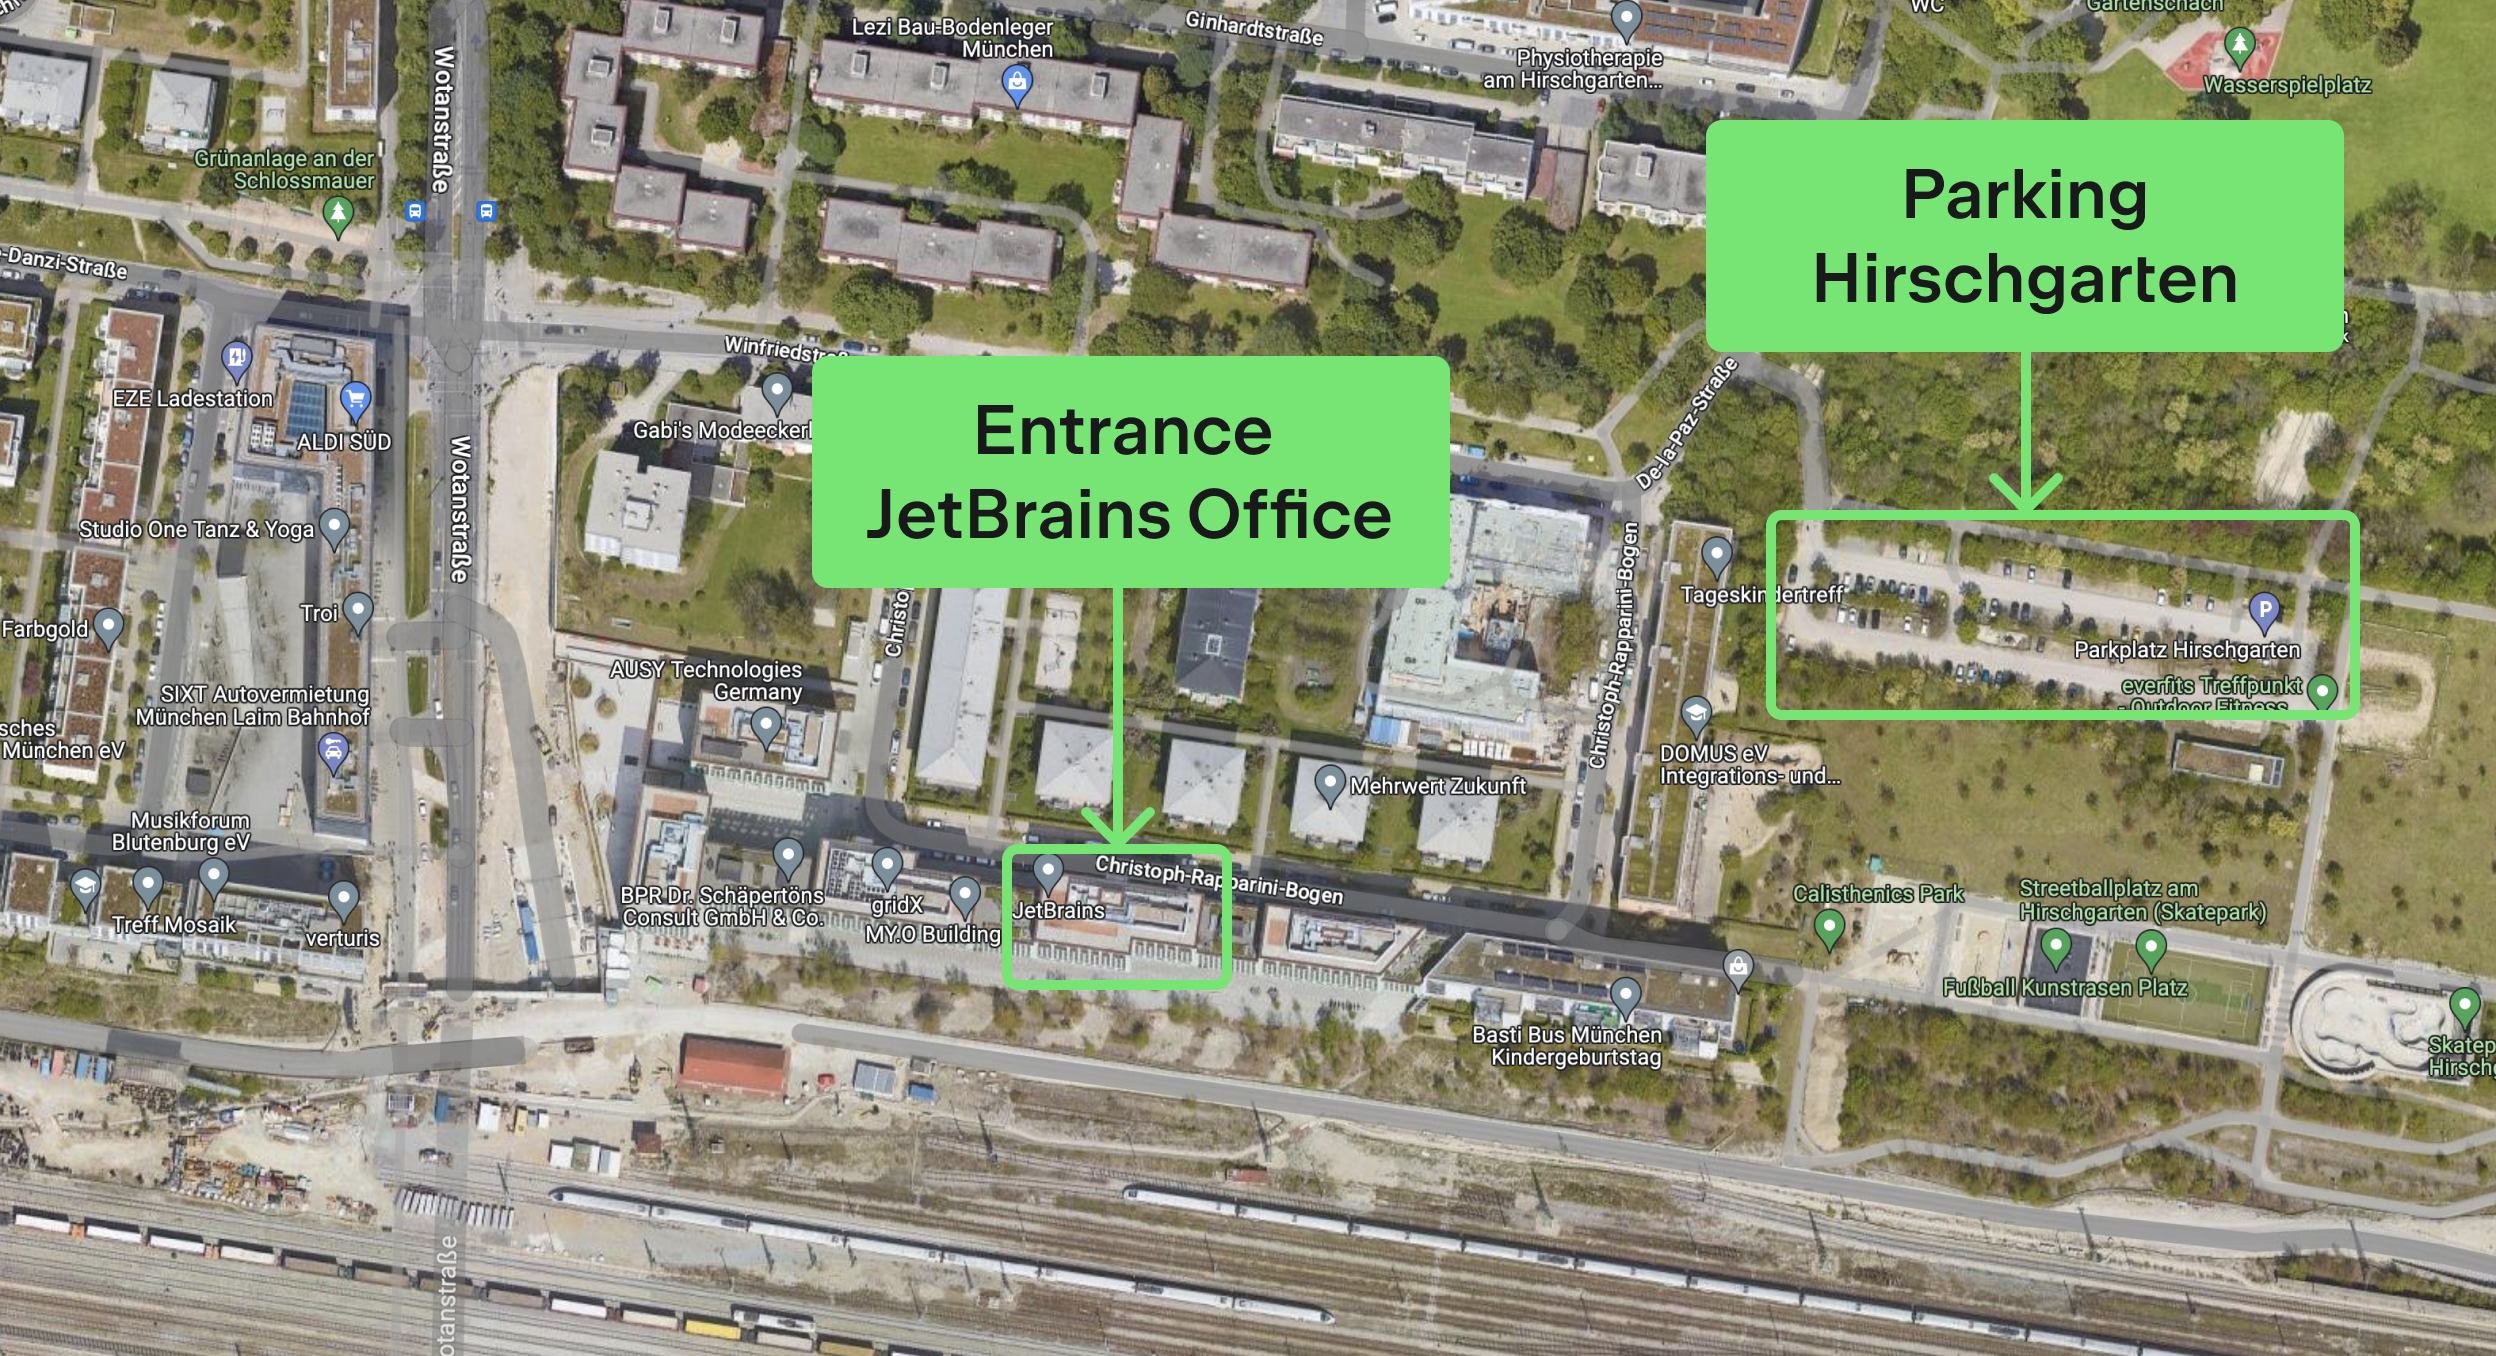 Map with 2 pins: 'Entrance JetBrains Office' and 'Parking Hirschgarten'